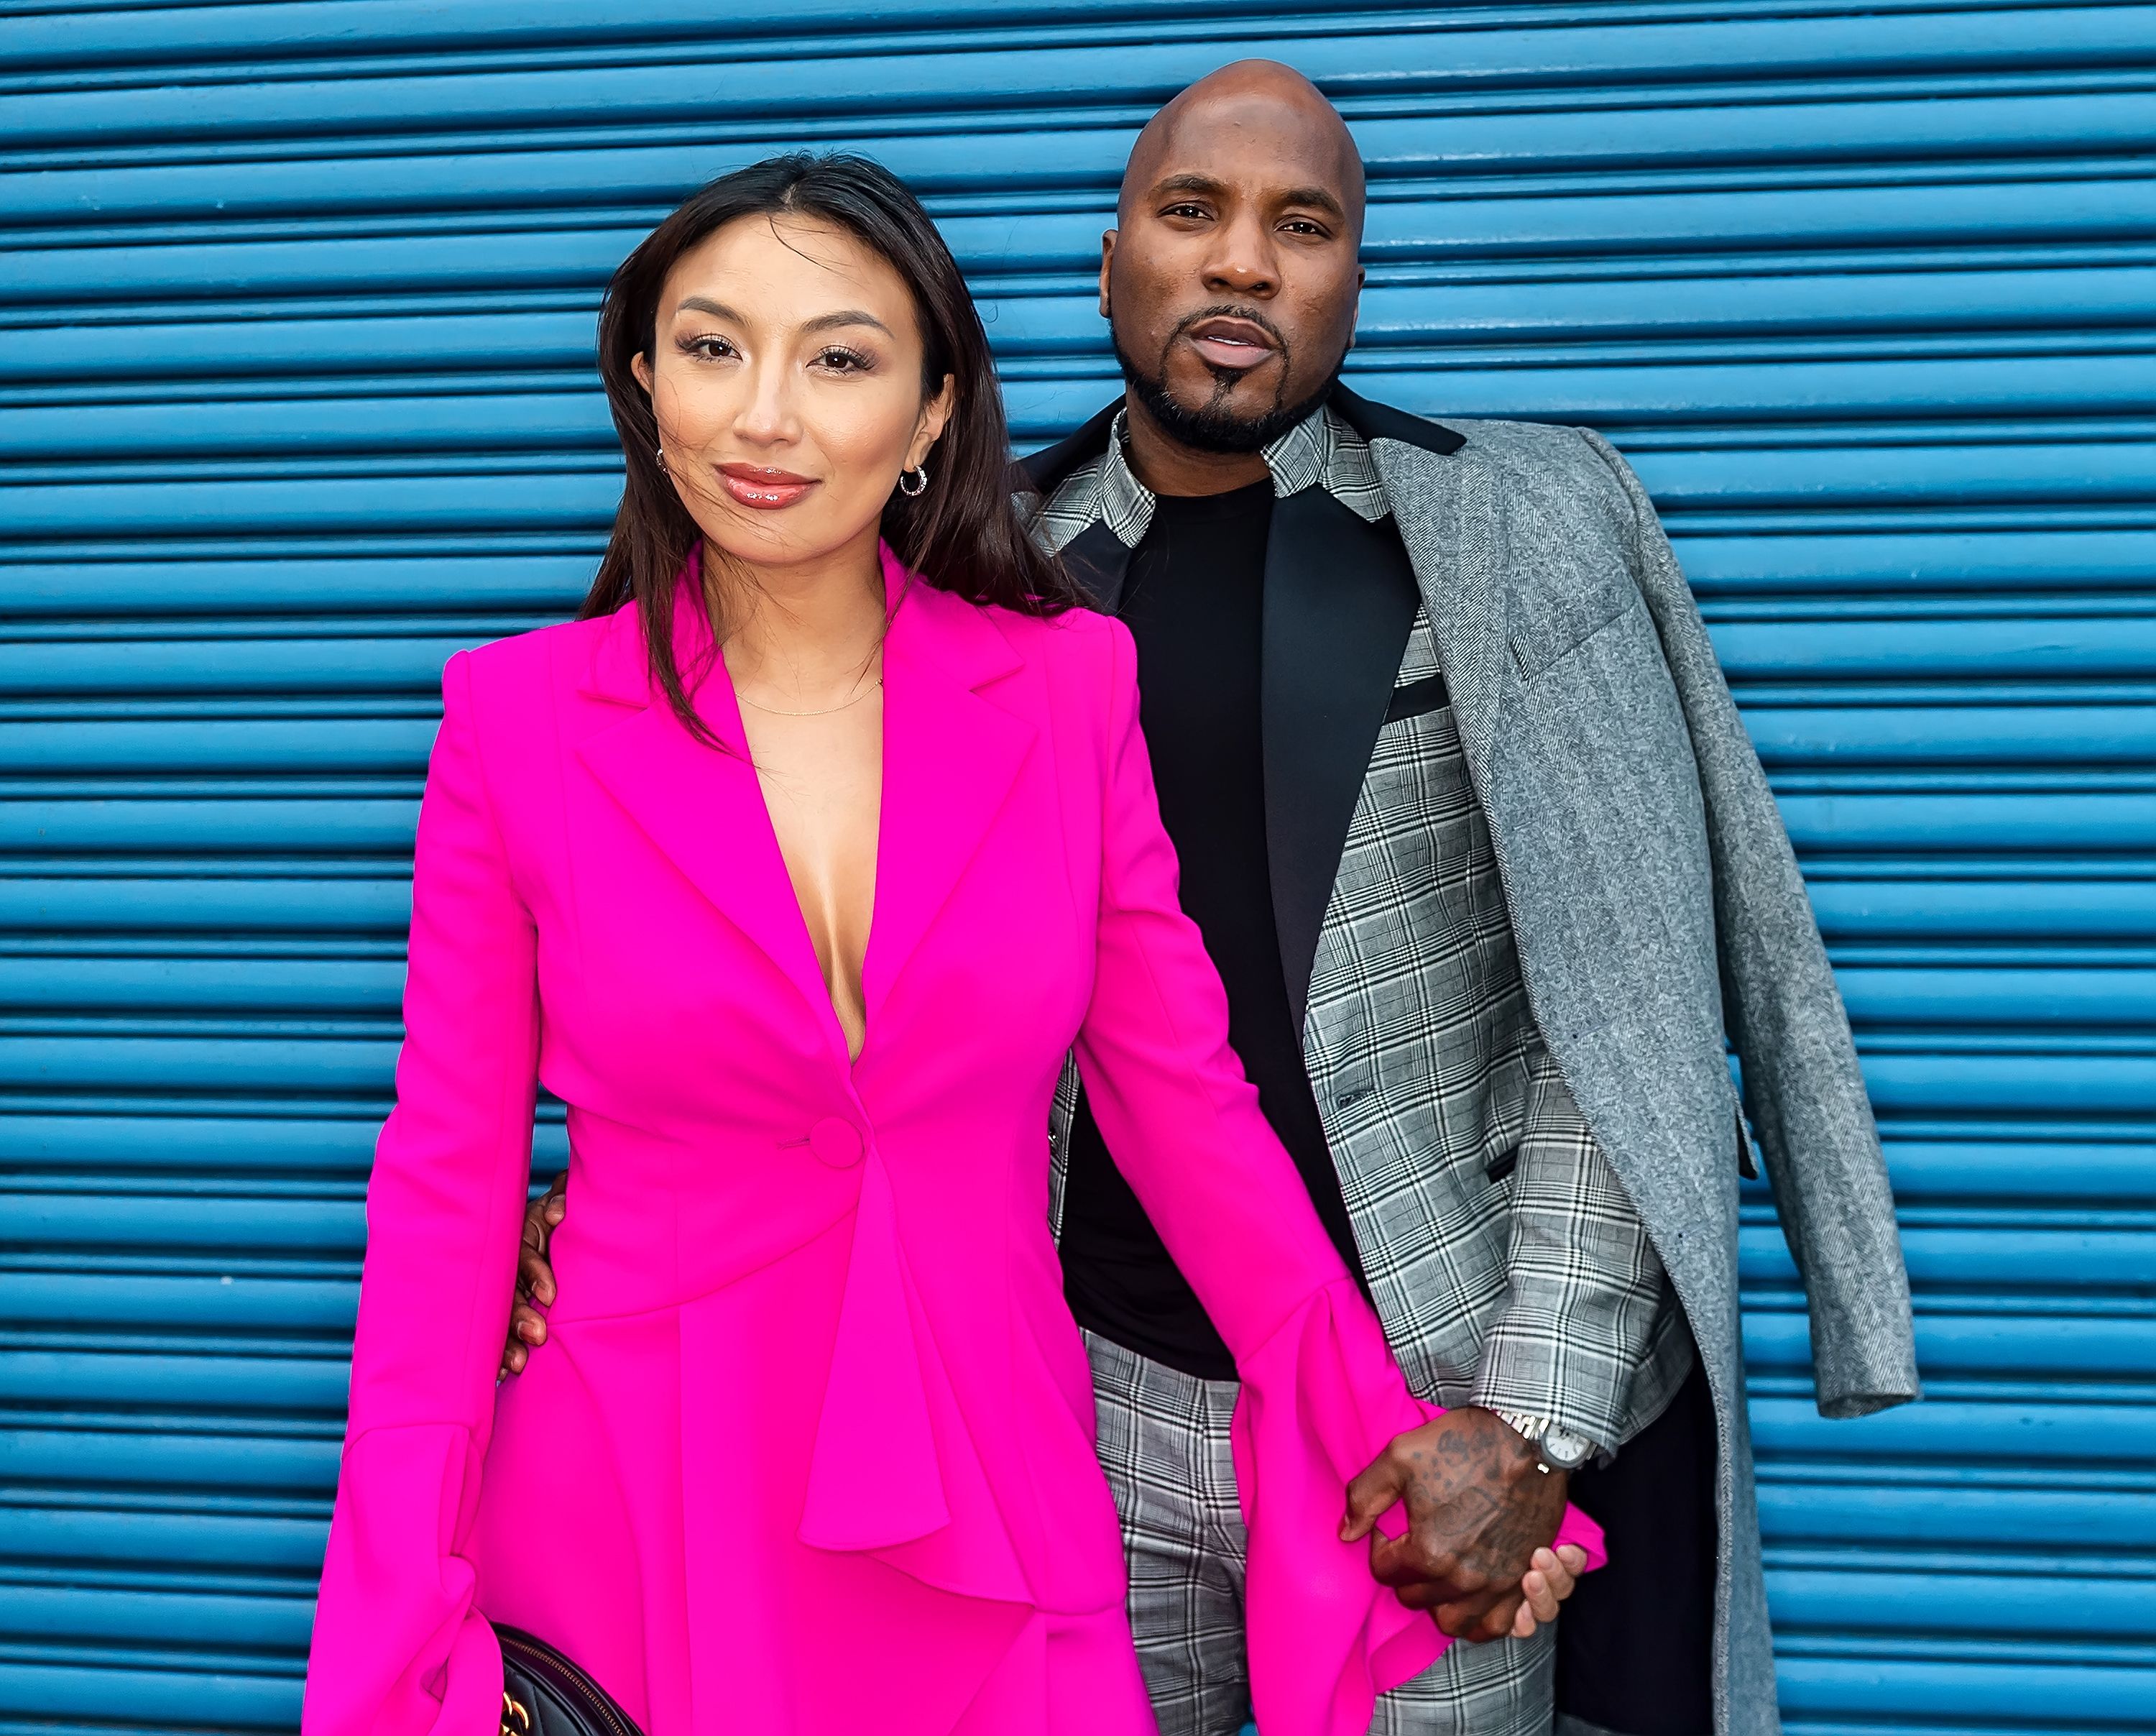 "The Real" co-host Jeannie Mai with fiancé Jeezy attending the New York Fashion Week at the Pier 59 Studios in February 2020. | Photo: Getty Images